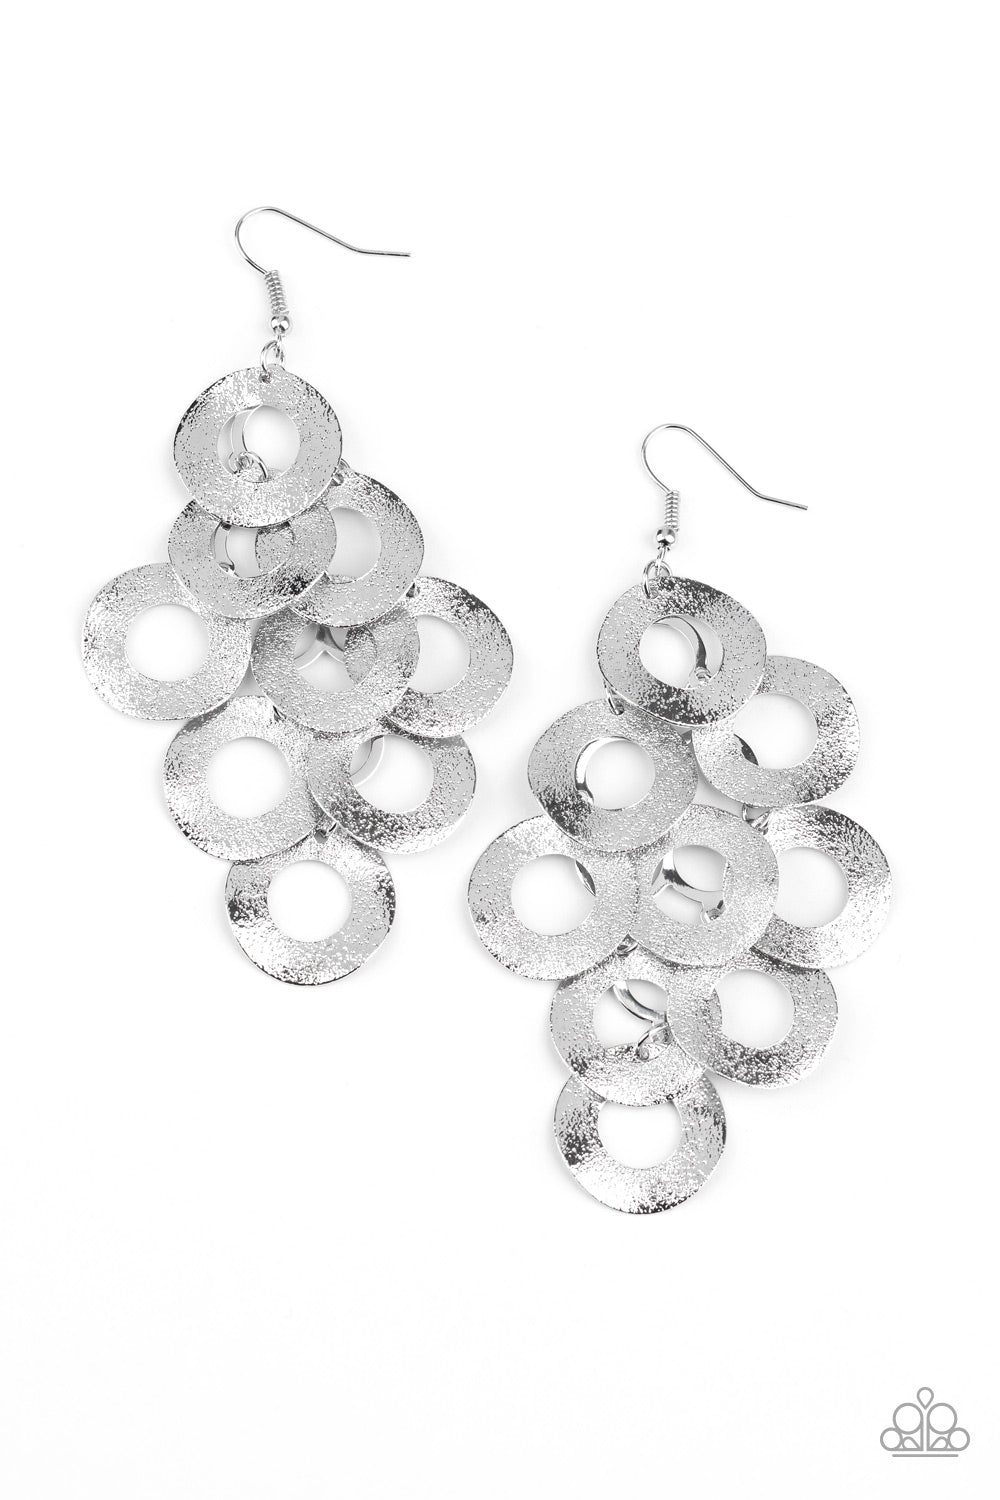 Paparazzi Accessories - Scattered Shimmer - Silver Earrings